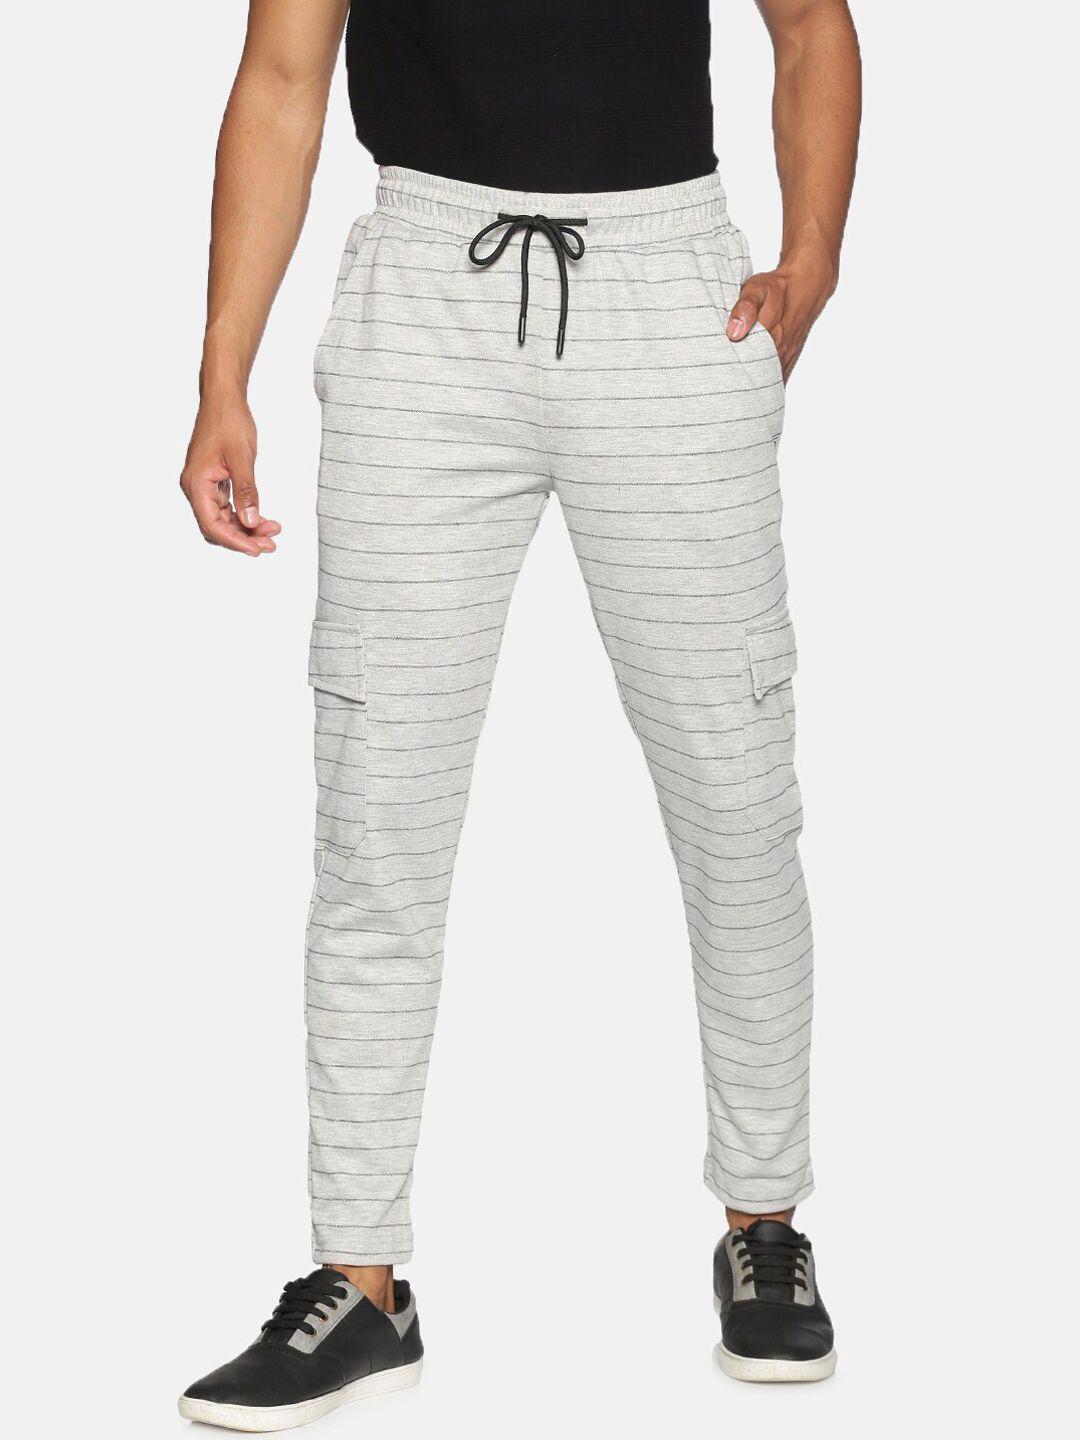 campus-sutra-men-grey-&-black-striped-straight-fit-cotton-track-pants